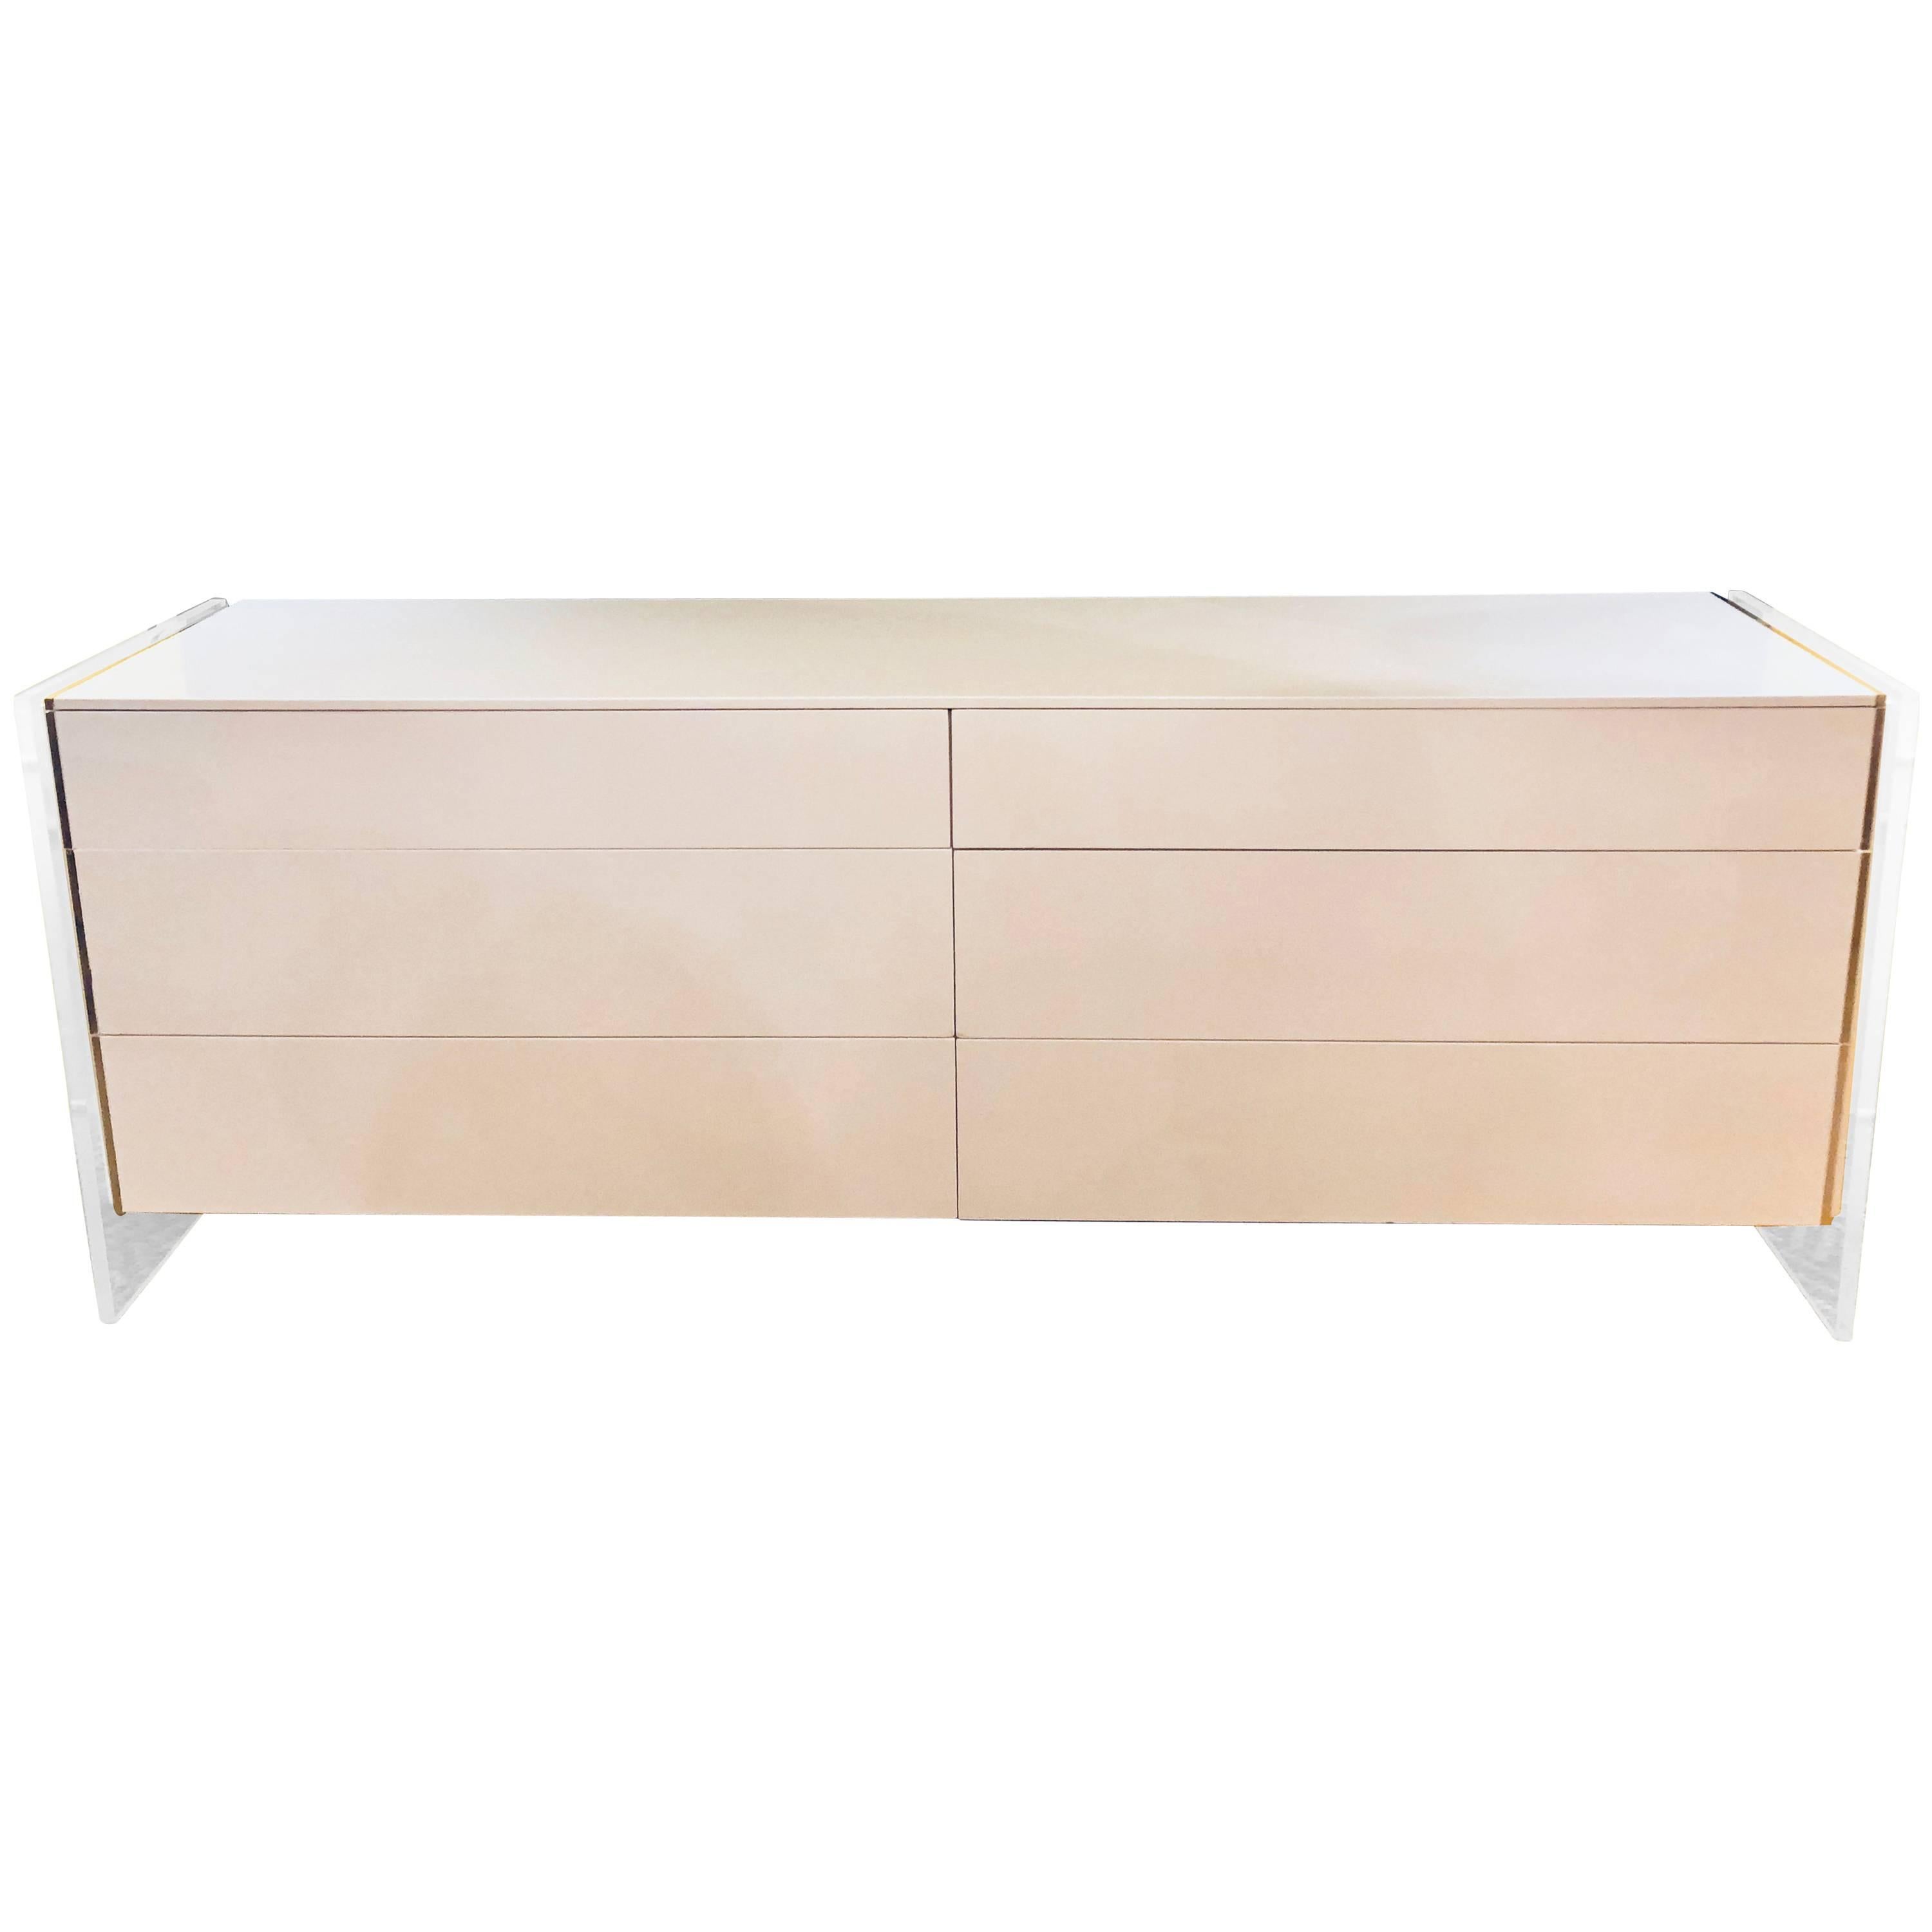 Mid-Century Modern White Dresser or Commode with Lucite Sides by John Stuart